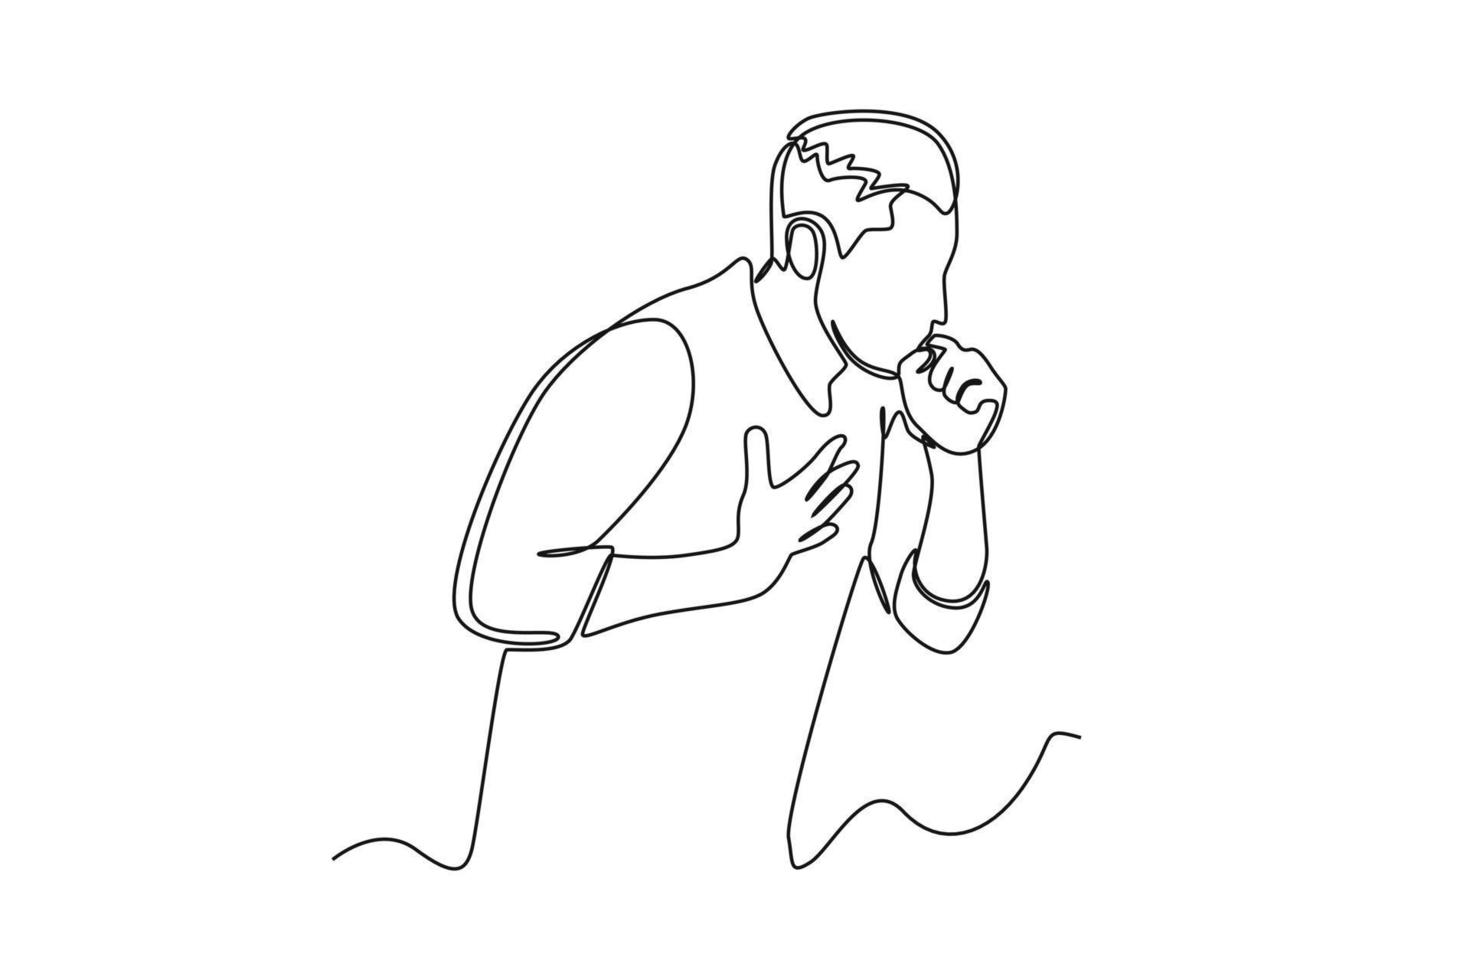 Single one line drawing Sick man coughing over his hand. Sick people concept. Continuous line draw design graphic vector illustration.